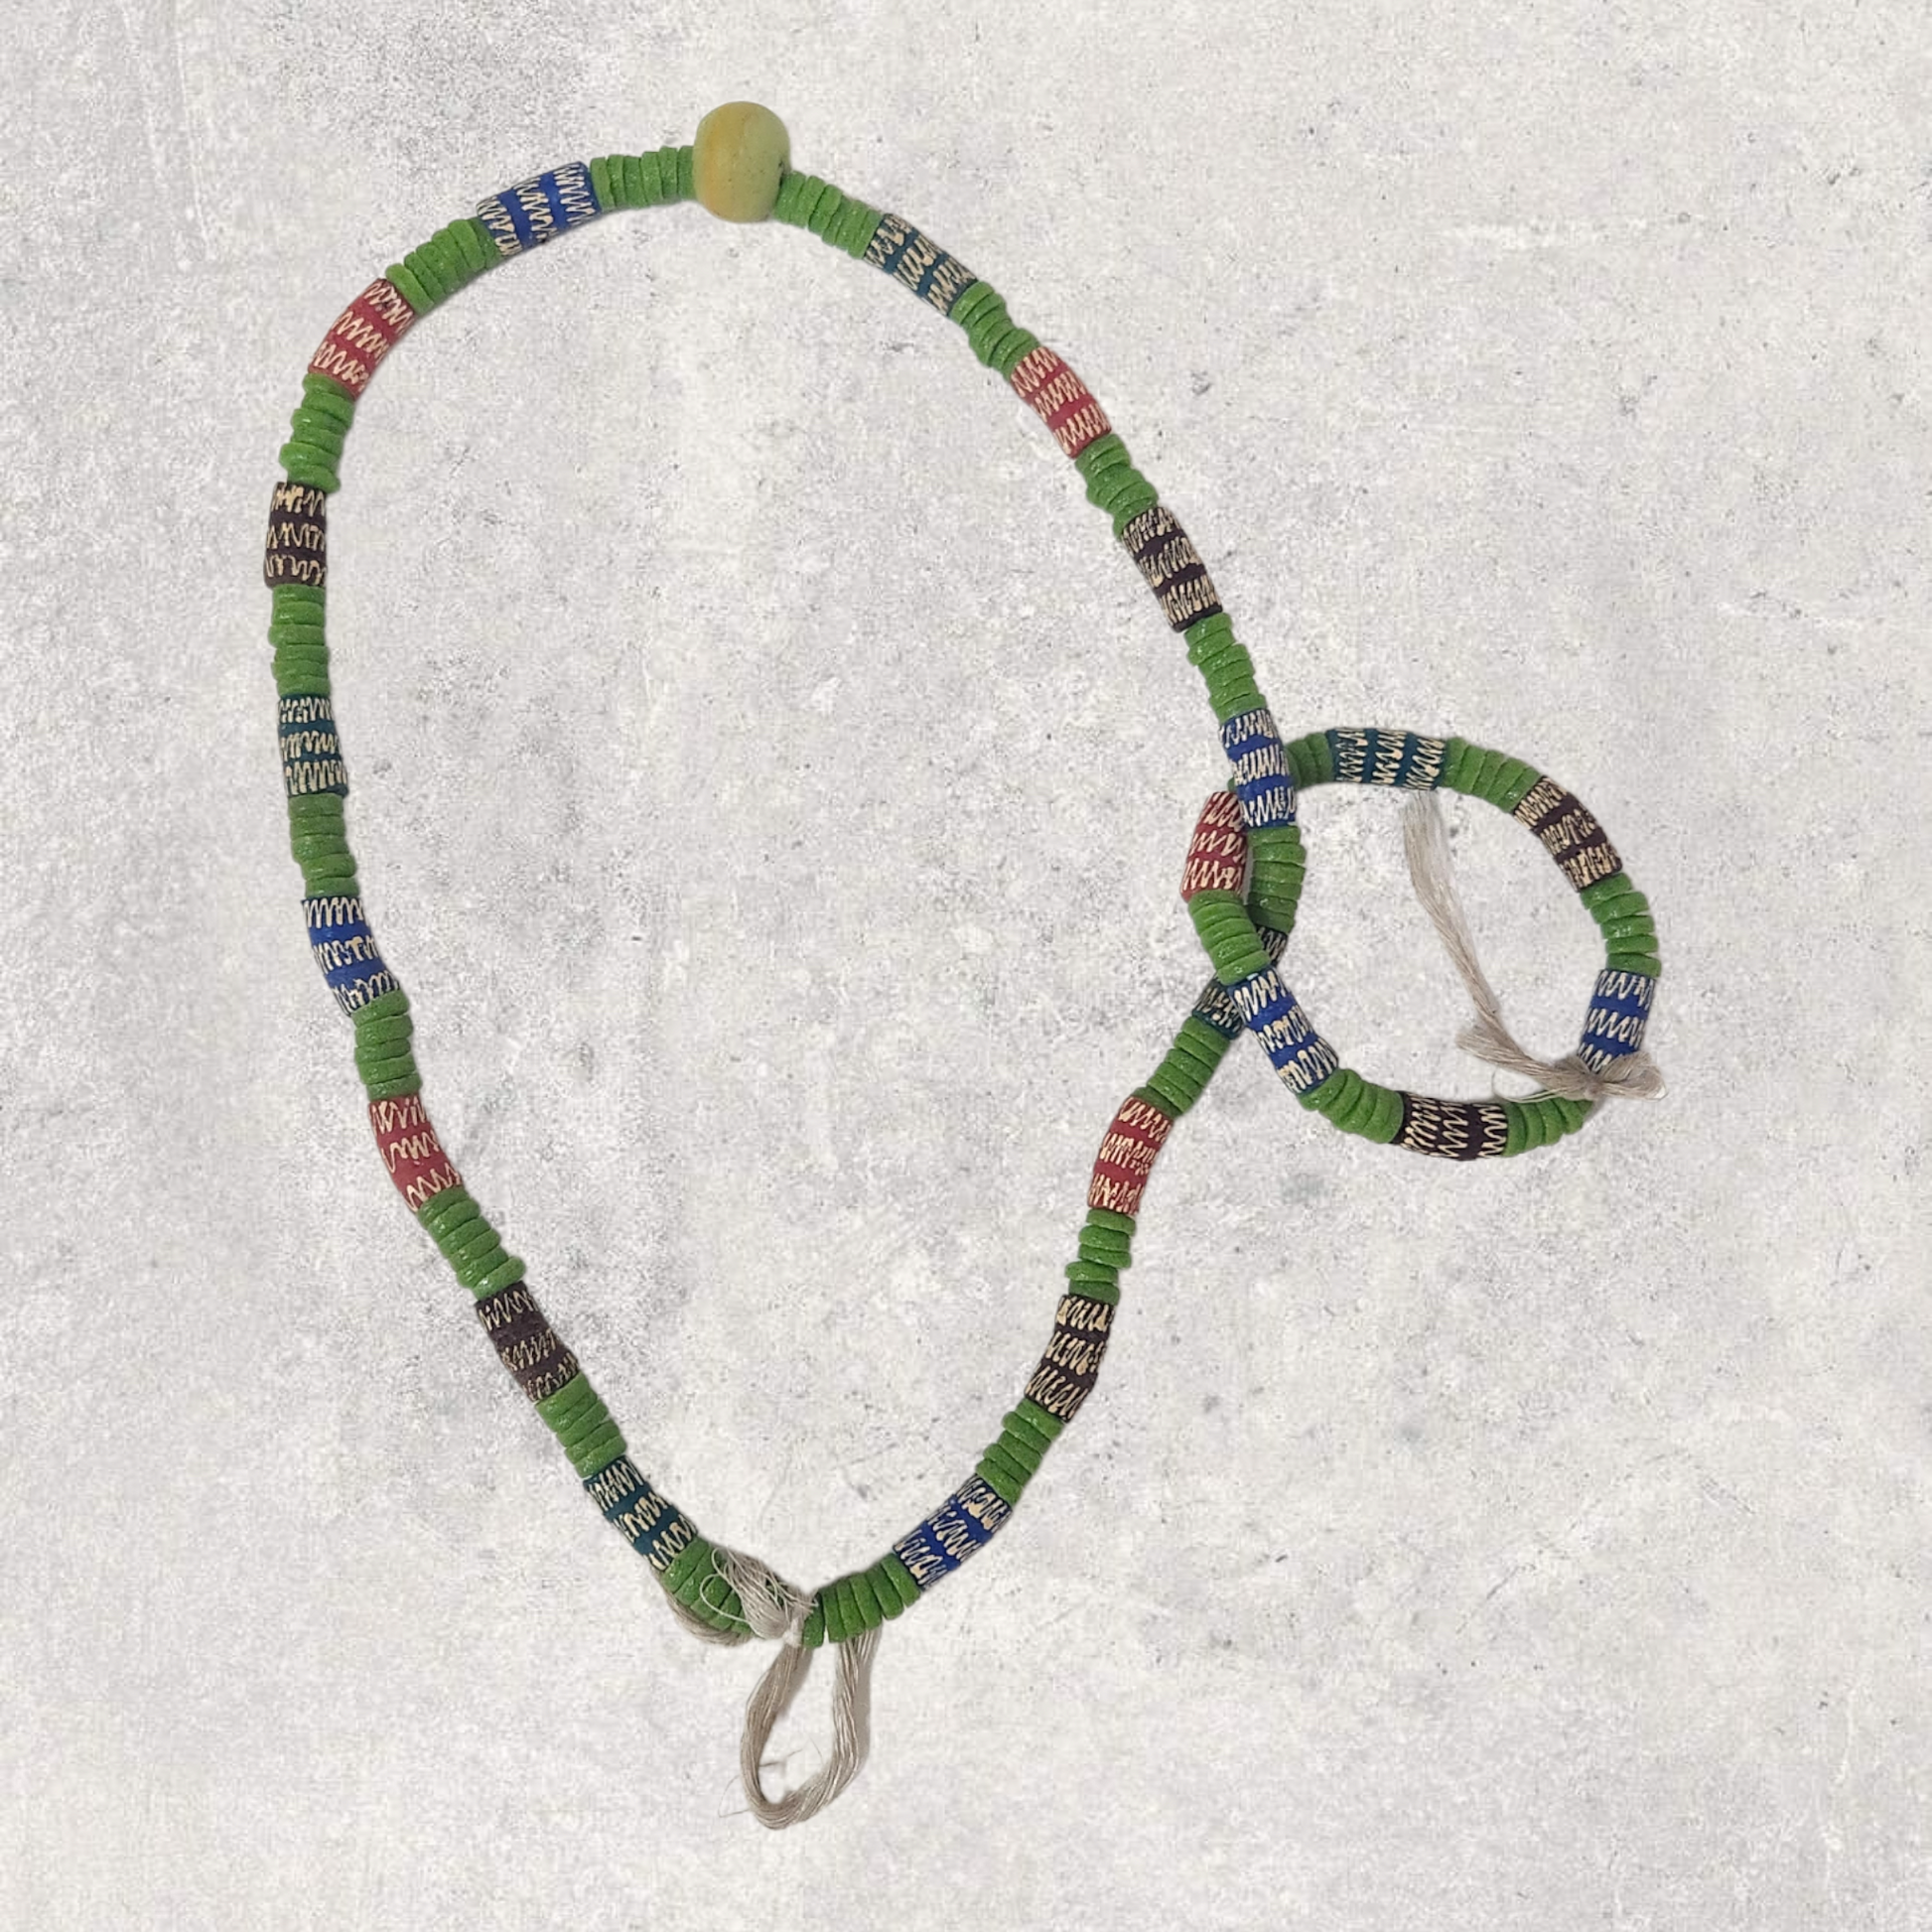 Glass bead necklace & Bracelet from Ghana ( 20th Century - MD African Art